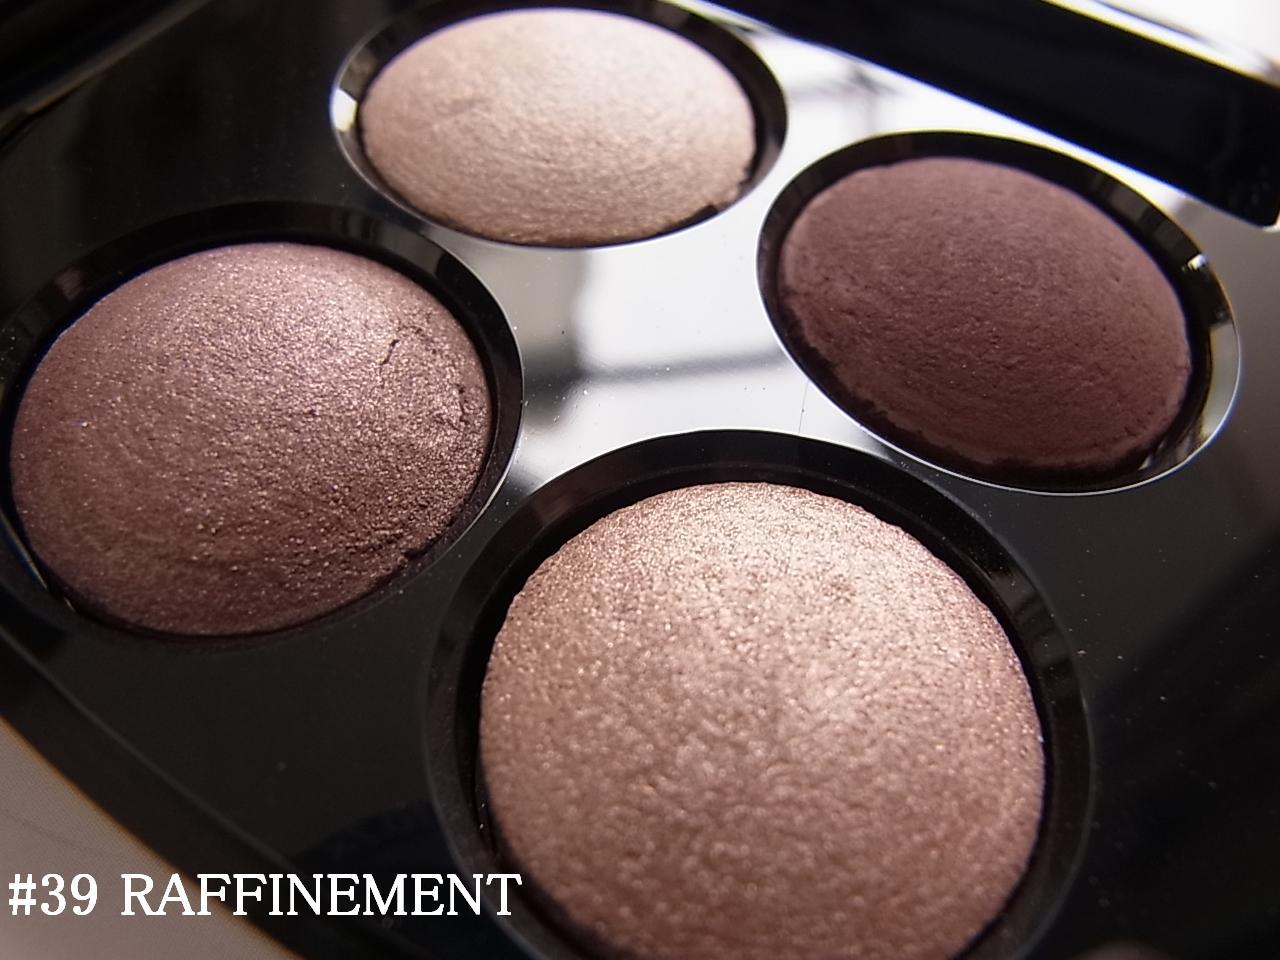 CHANEL】LES 4 OMBRES #39 RAFFINEMENT | atsuknさんのブログ